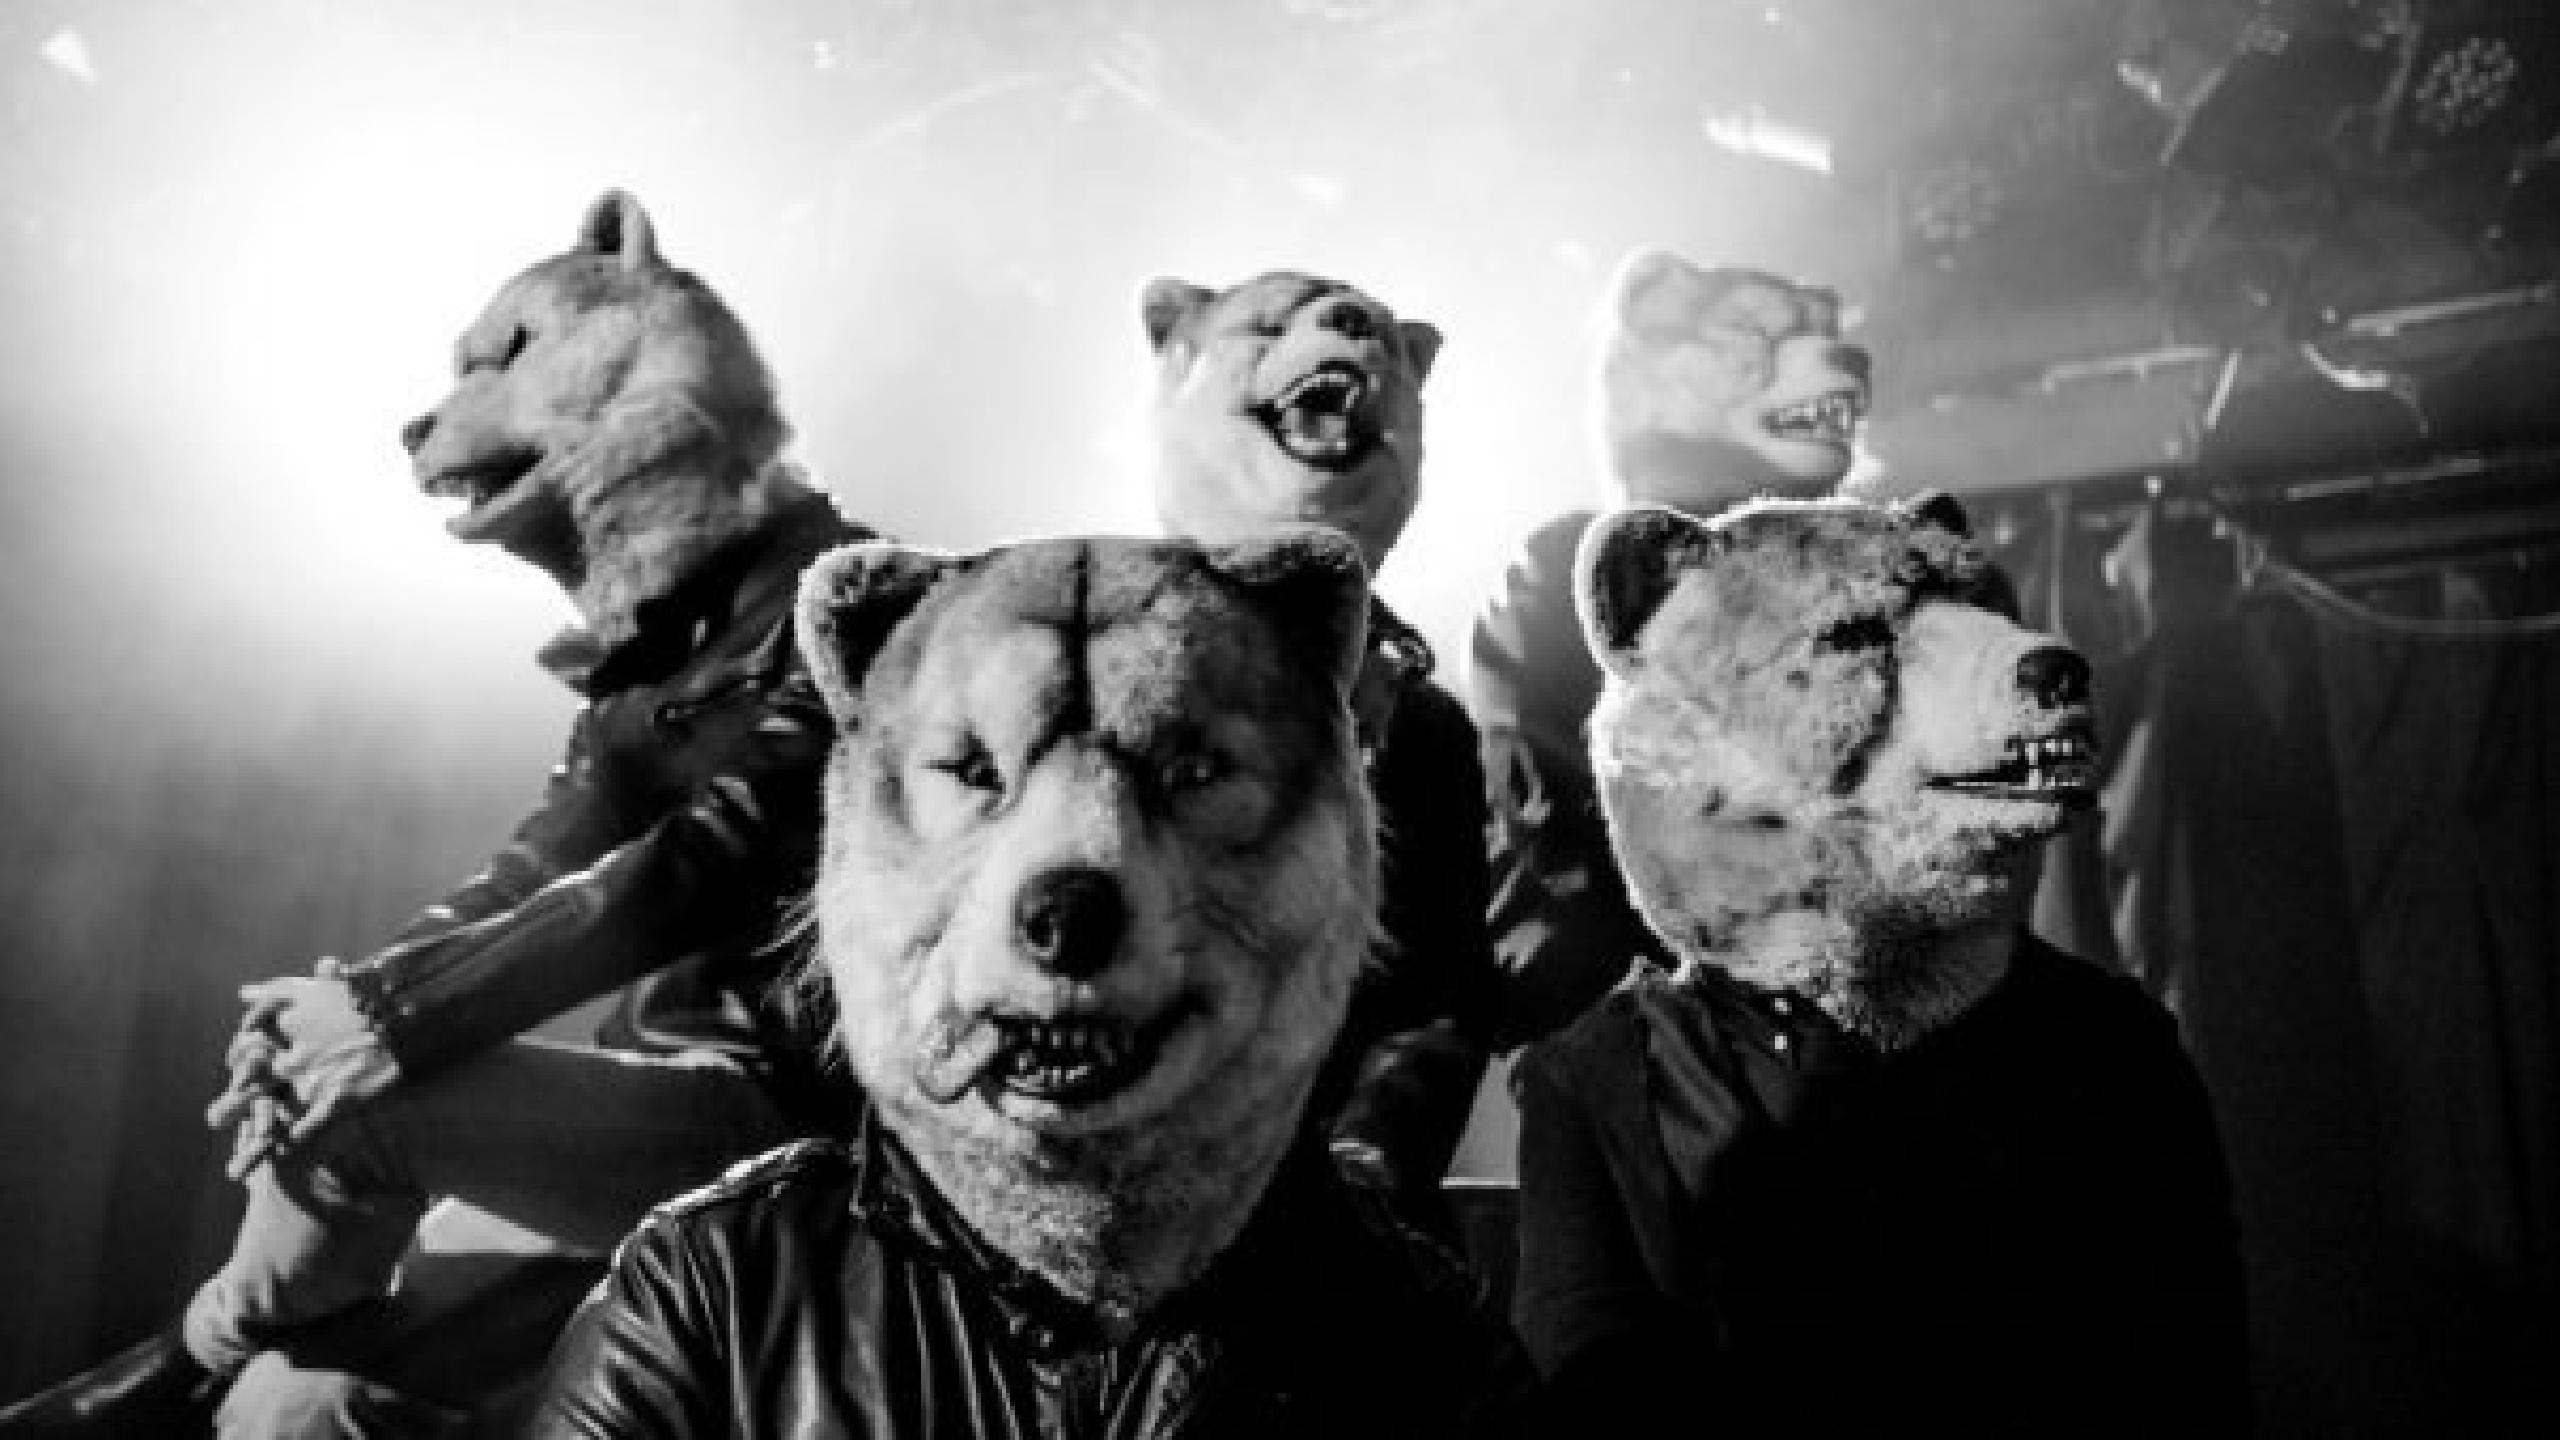 Man With A Mission Tour Dates 21 Man With A Mission Tickets And Concerts Wegow Canada